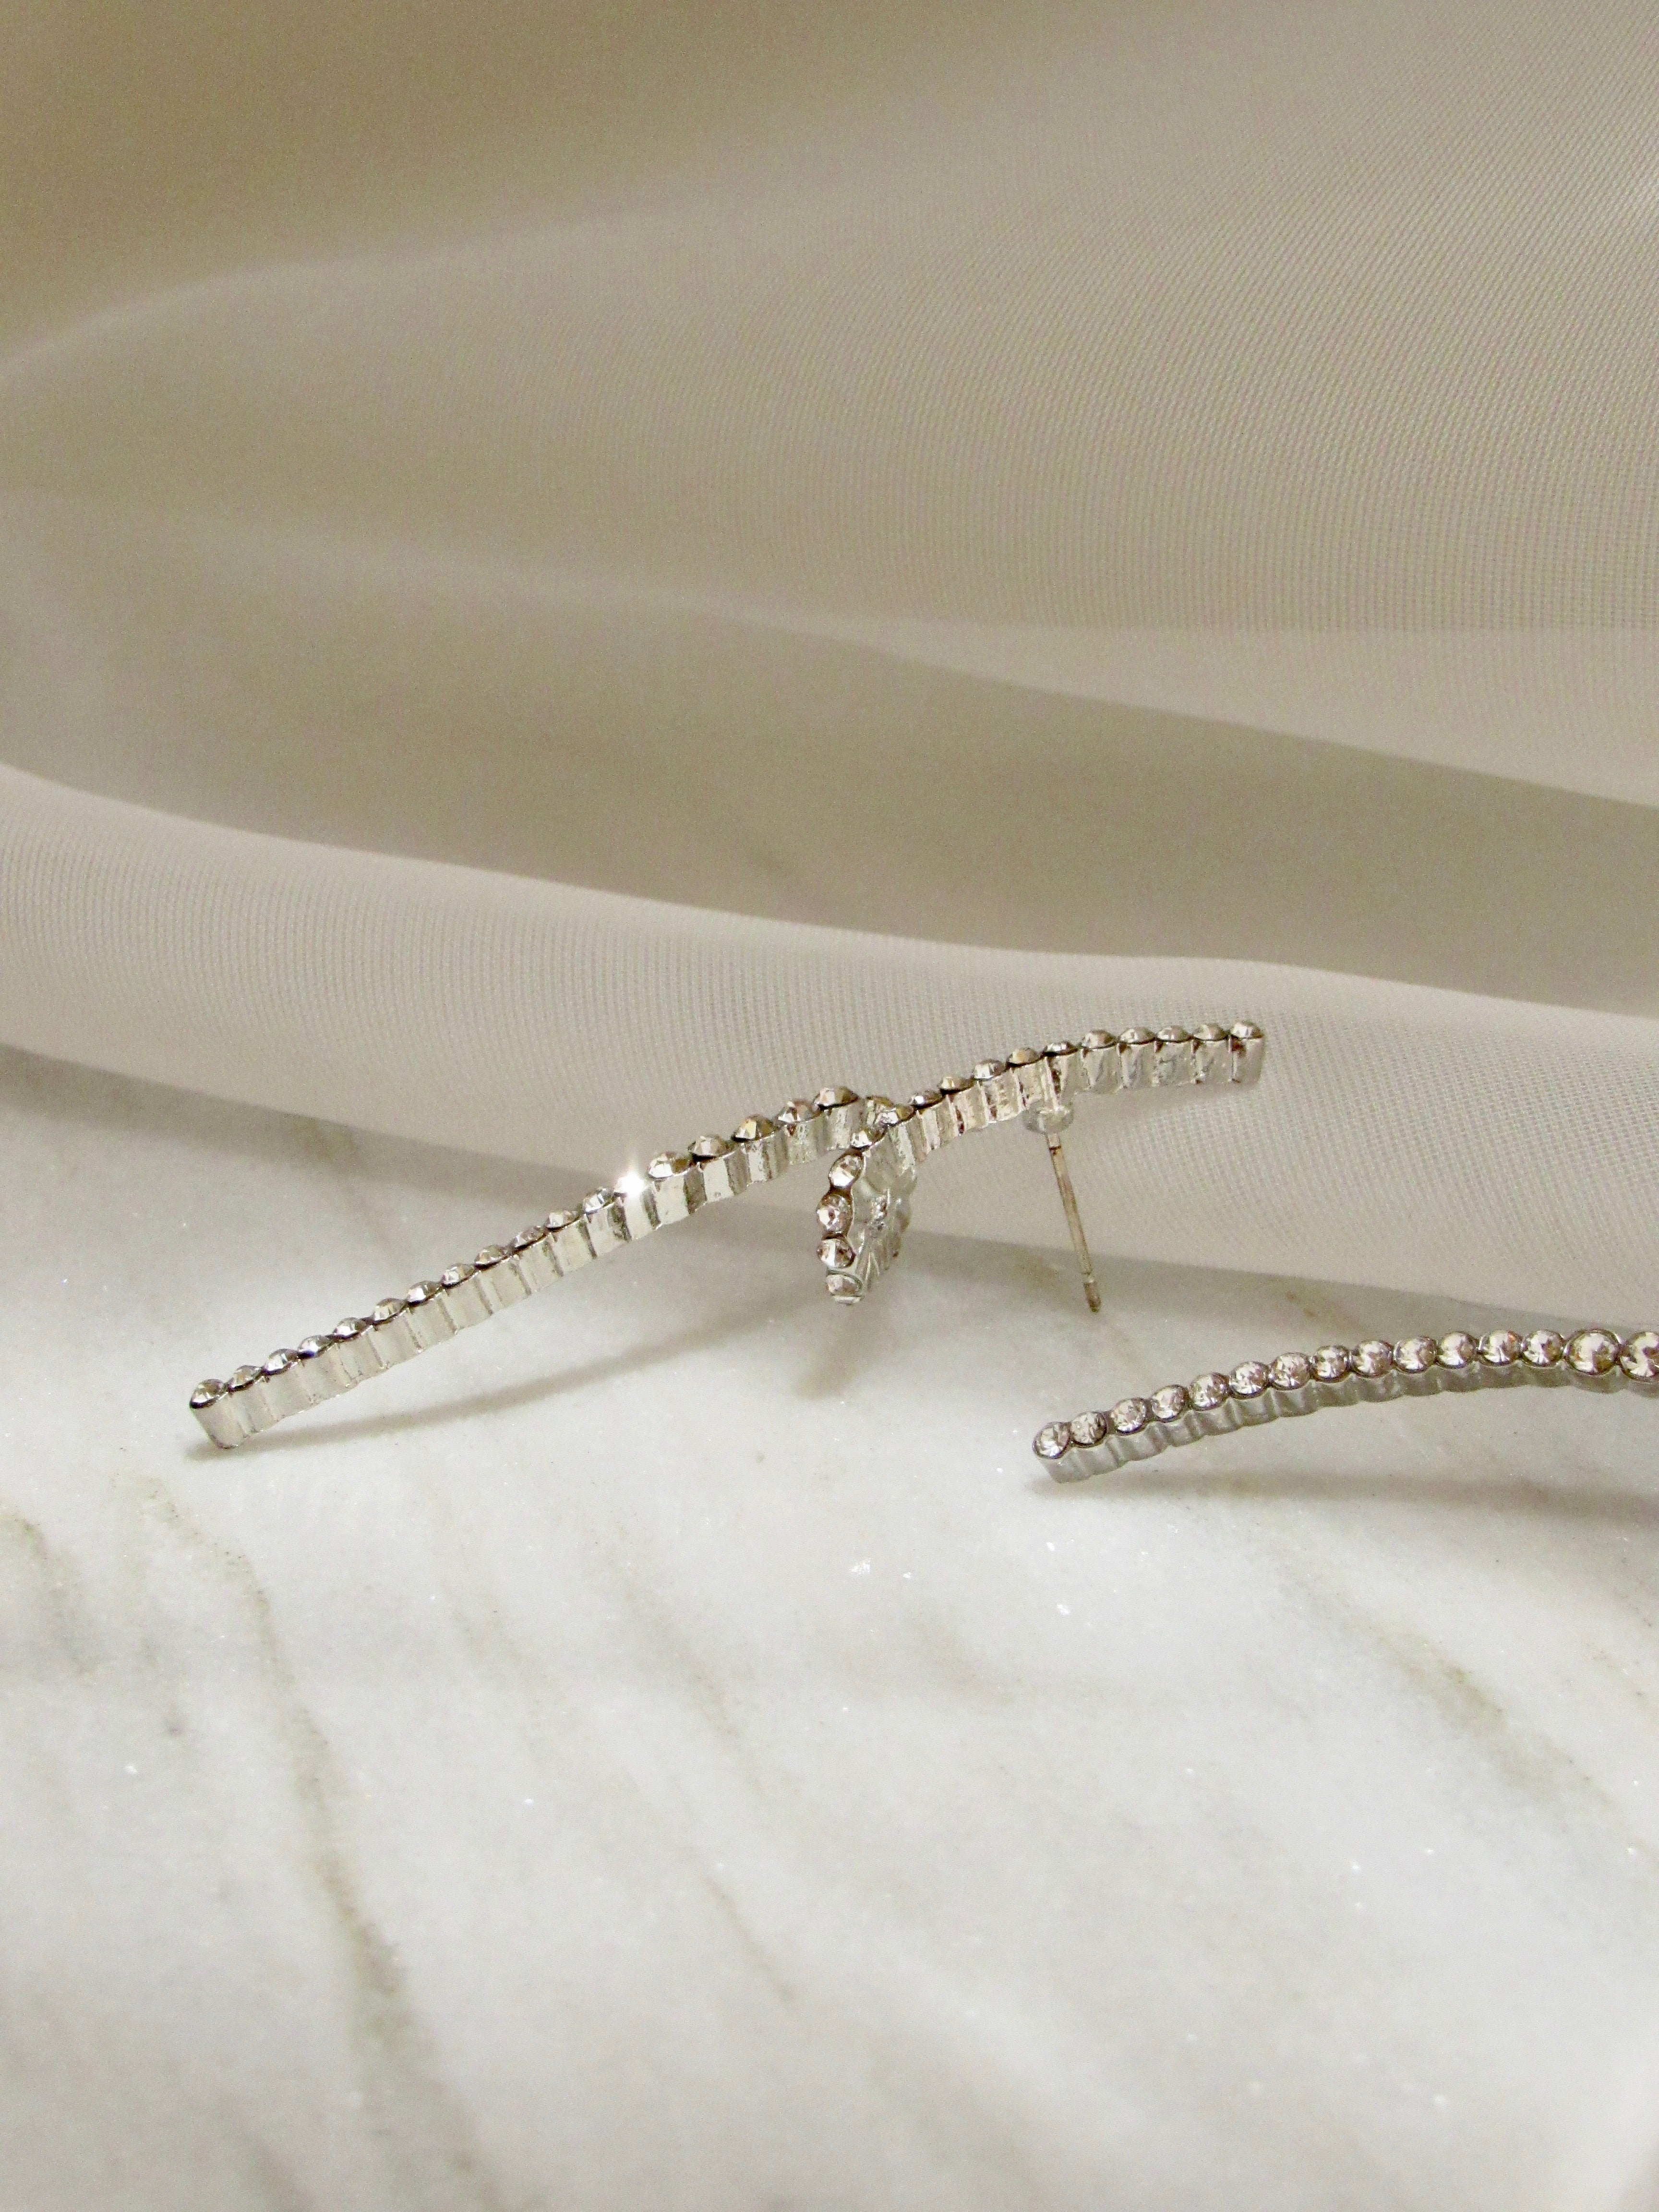 Spiral Silver Earrings with Crystal